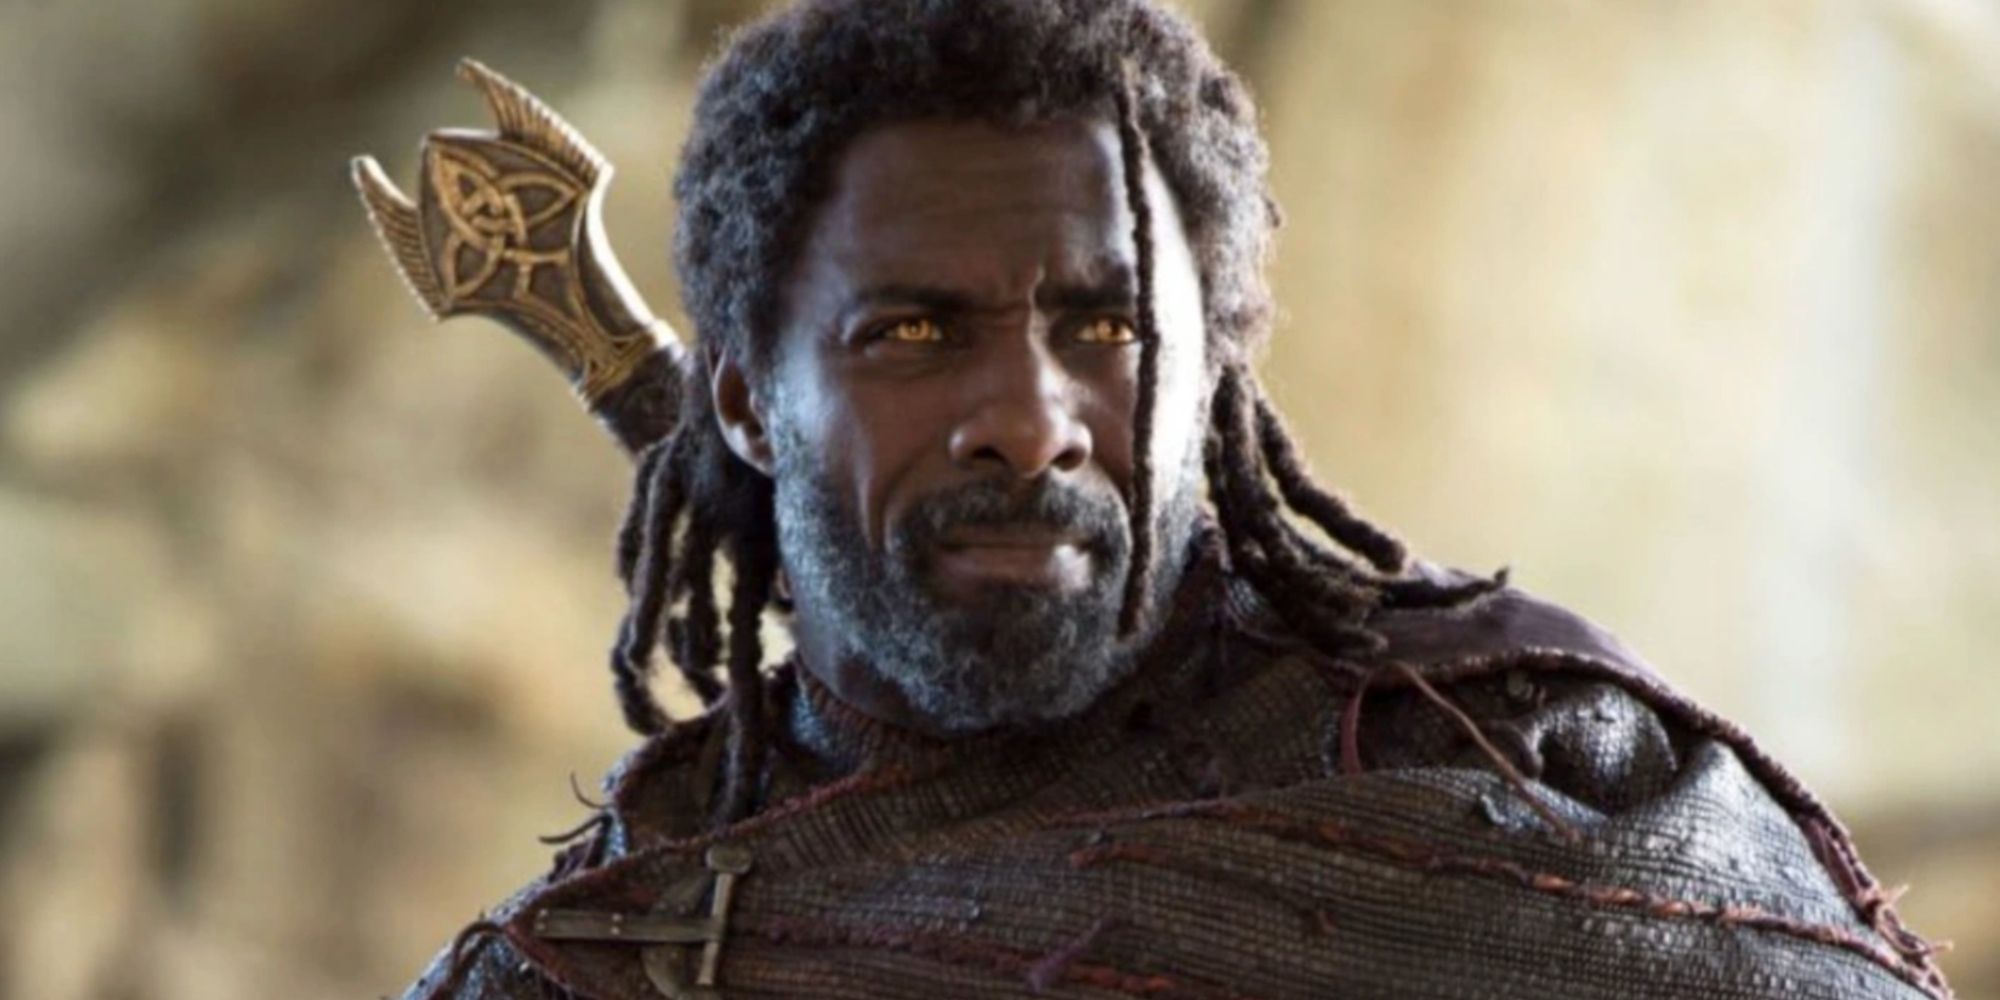 Idris Elba as Heimdall staring off to the side 